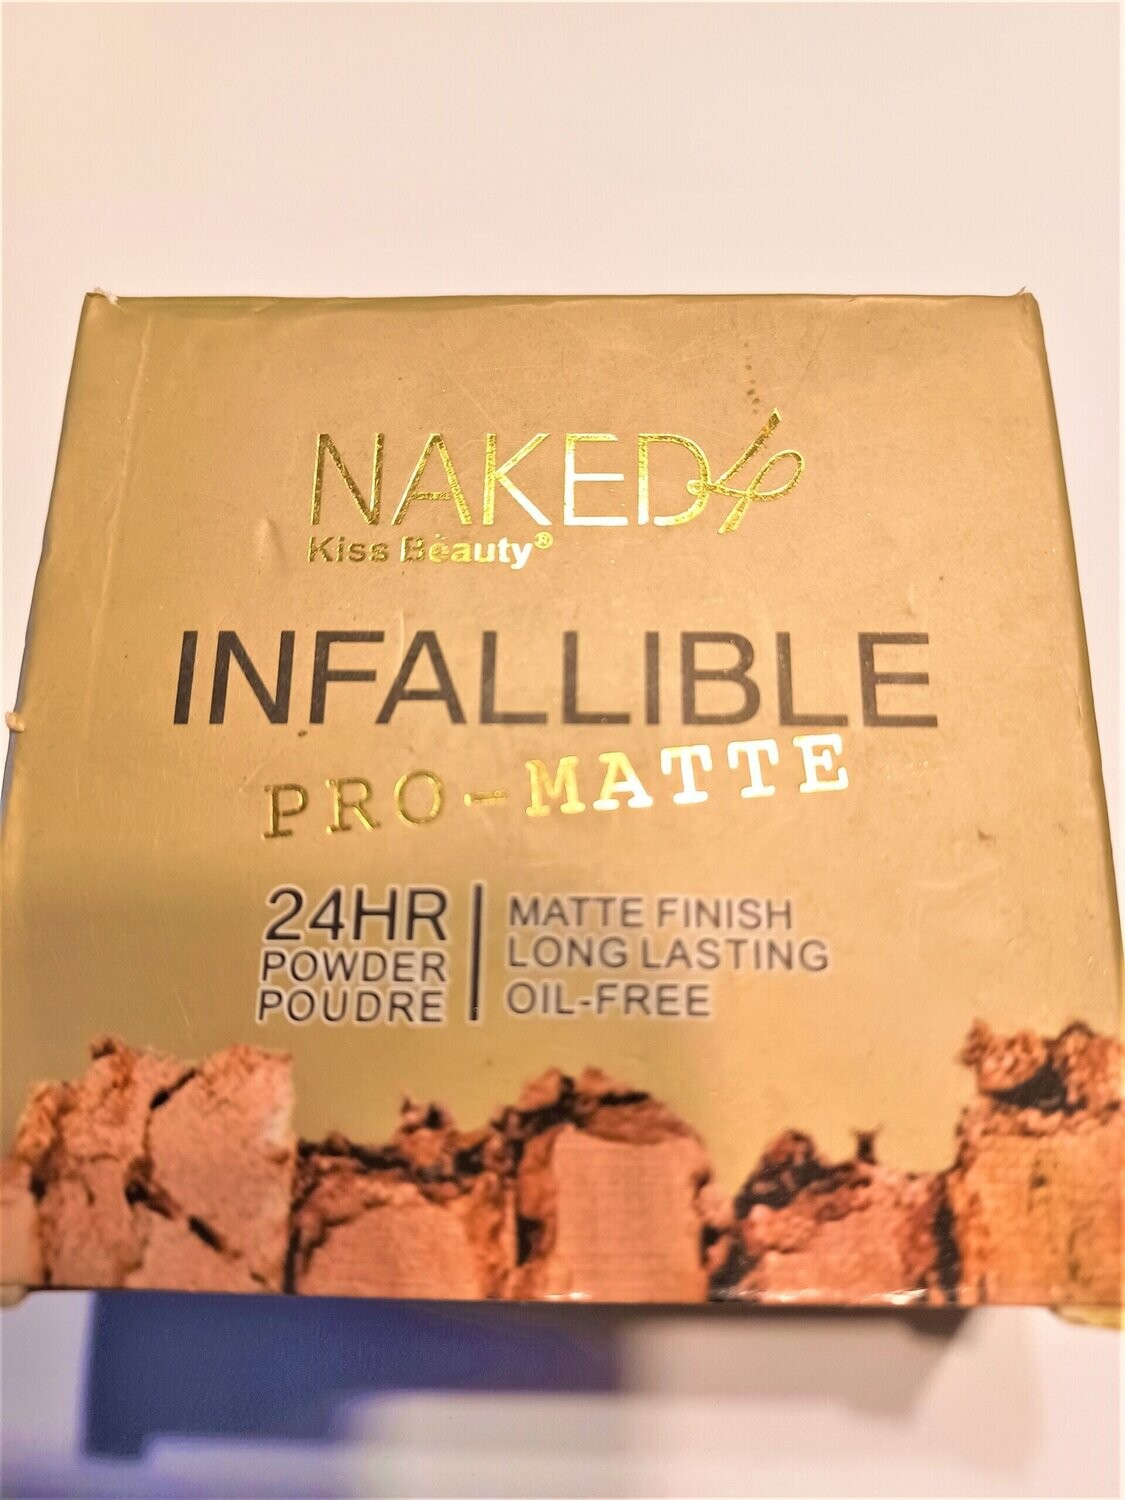 Naked Kiss Beauty Infallible Pro-Matte 24hr Powder 2 in 1 Color 3 dark